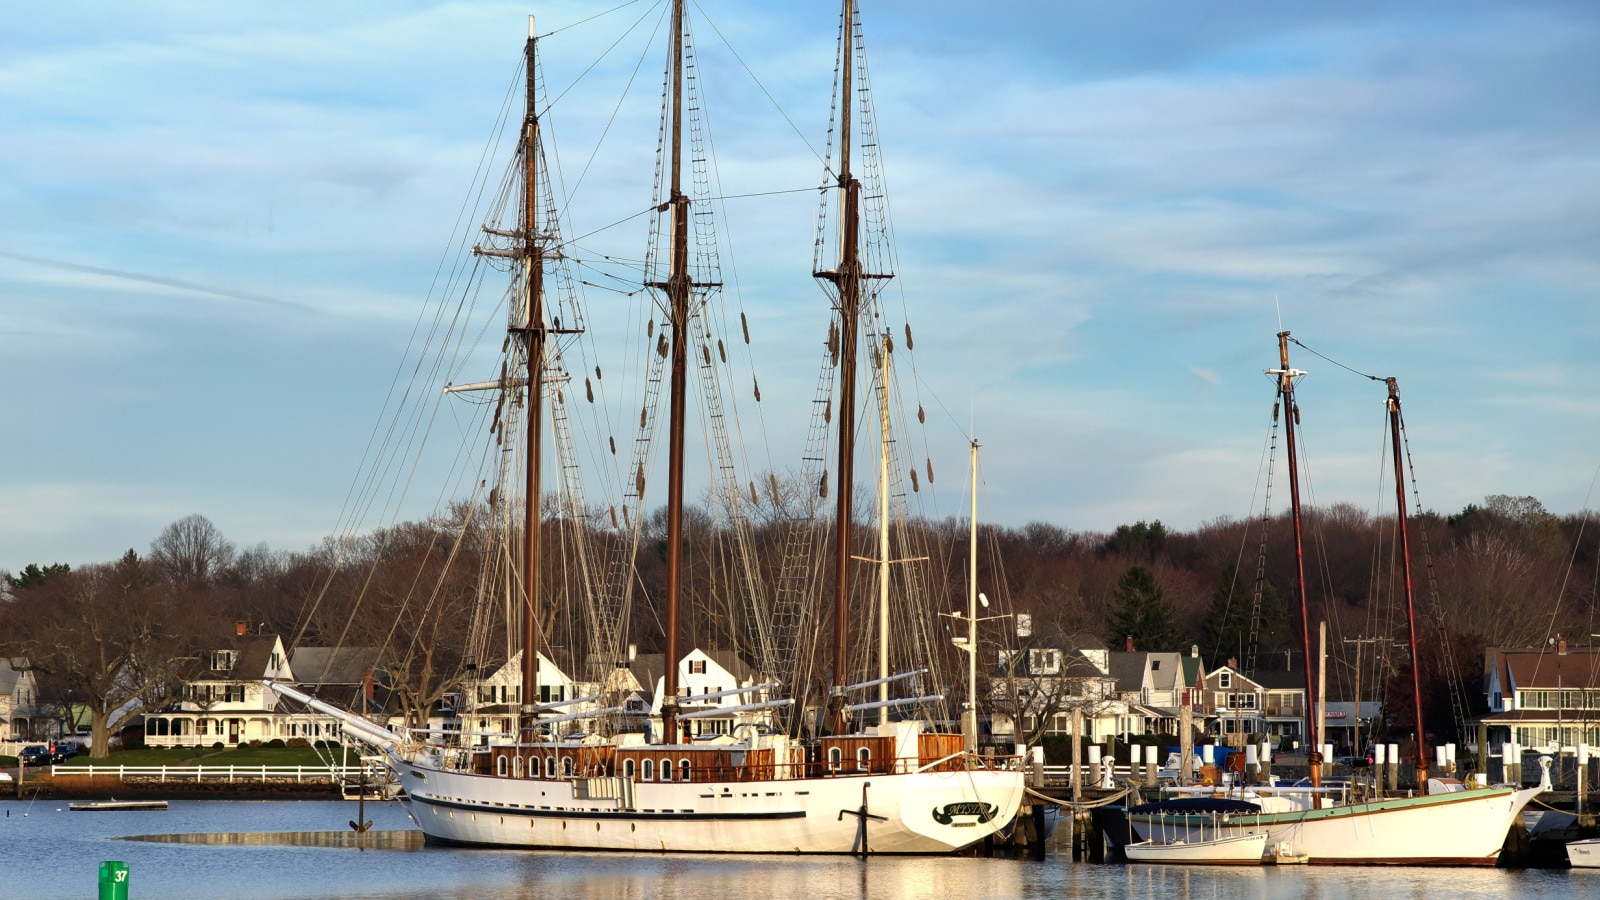 <p>In the coastal town of Mystic, this living history museum is a must-visit. It allows visitors to explore historic ships and learn about maritime heritage.</p>